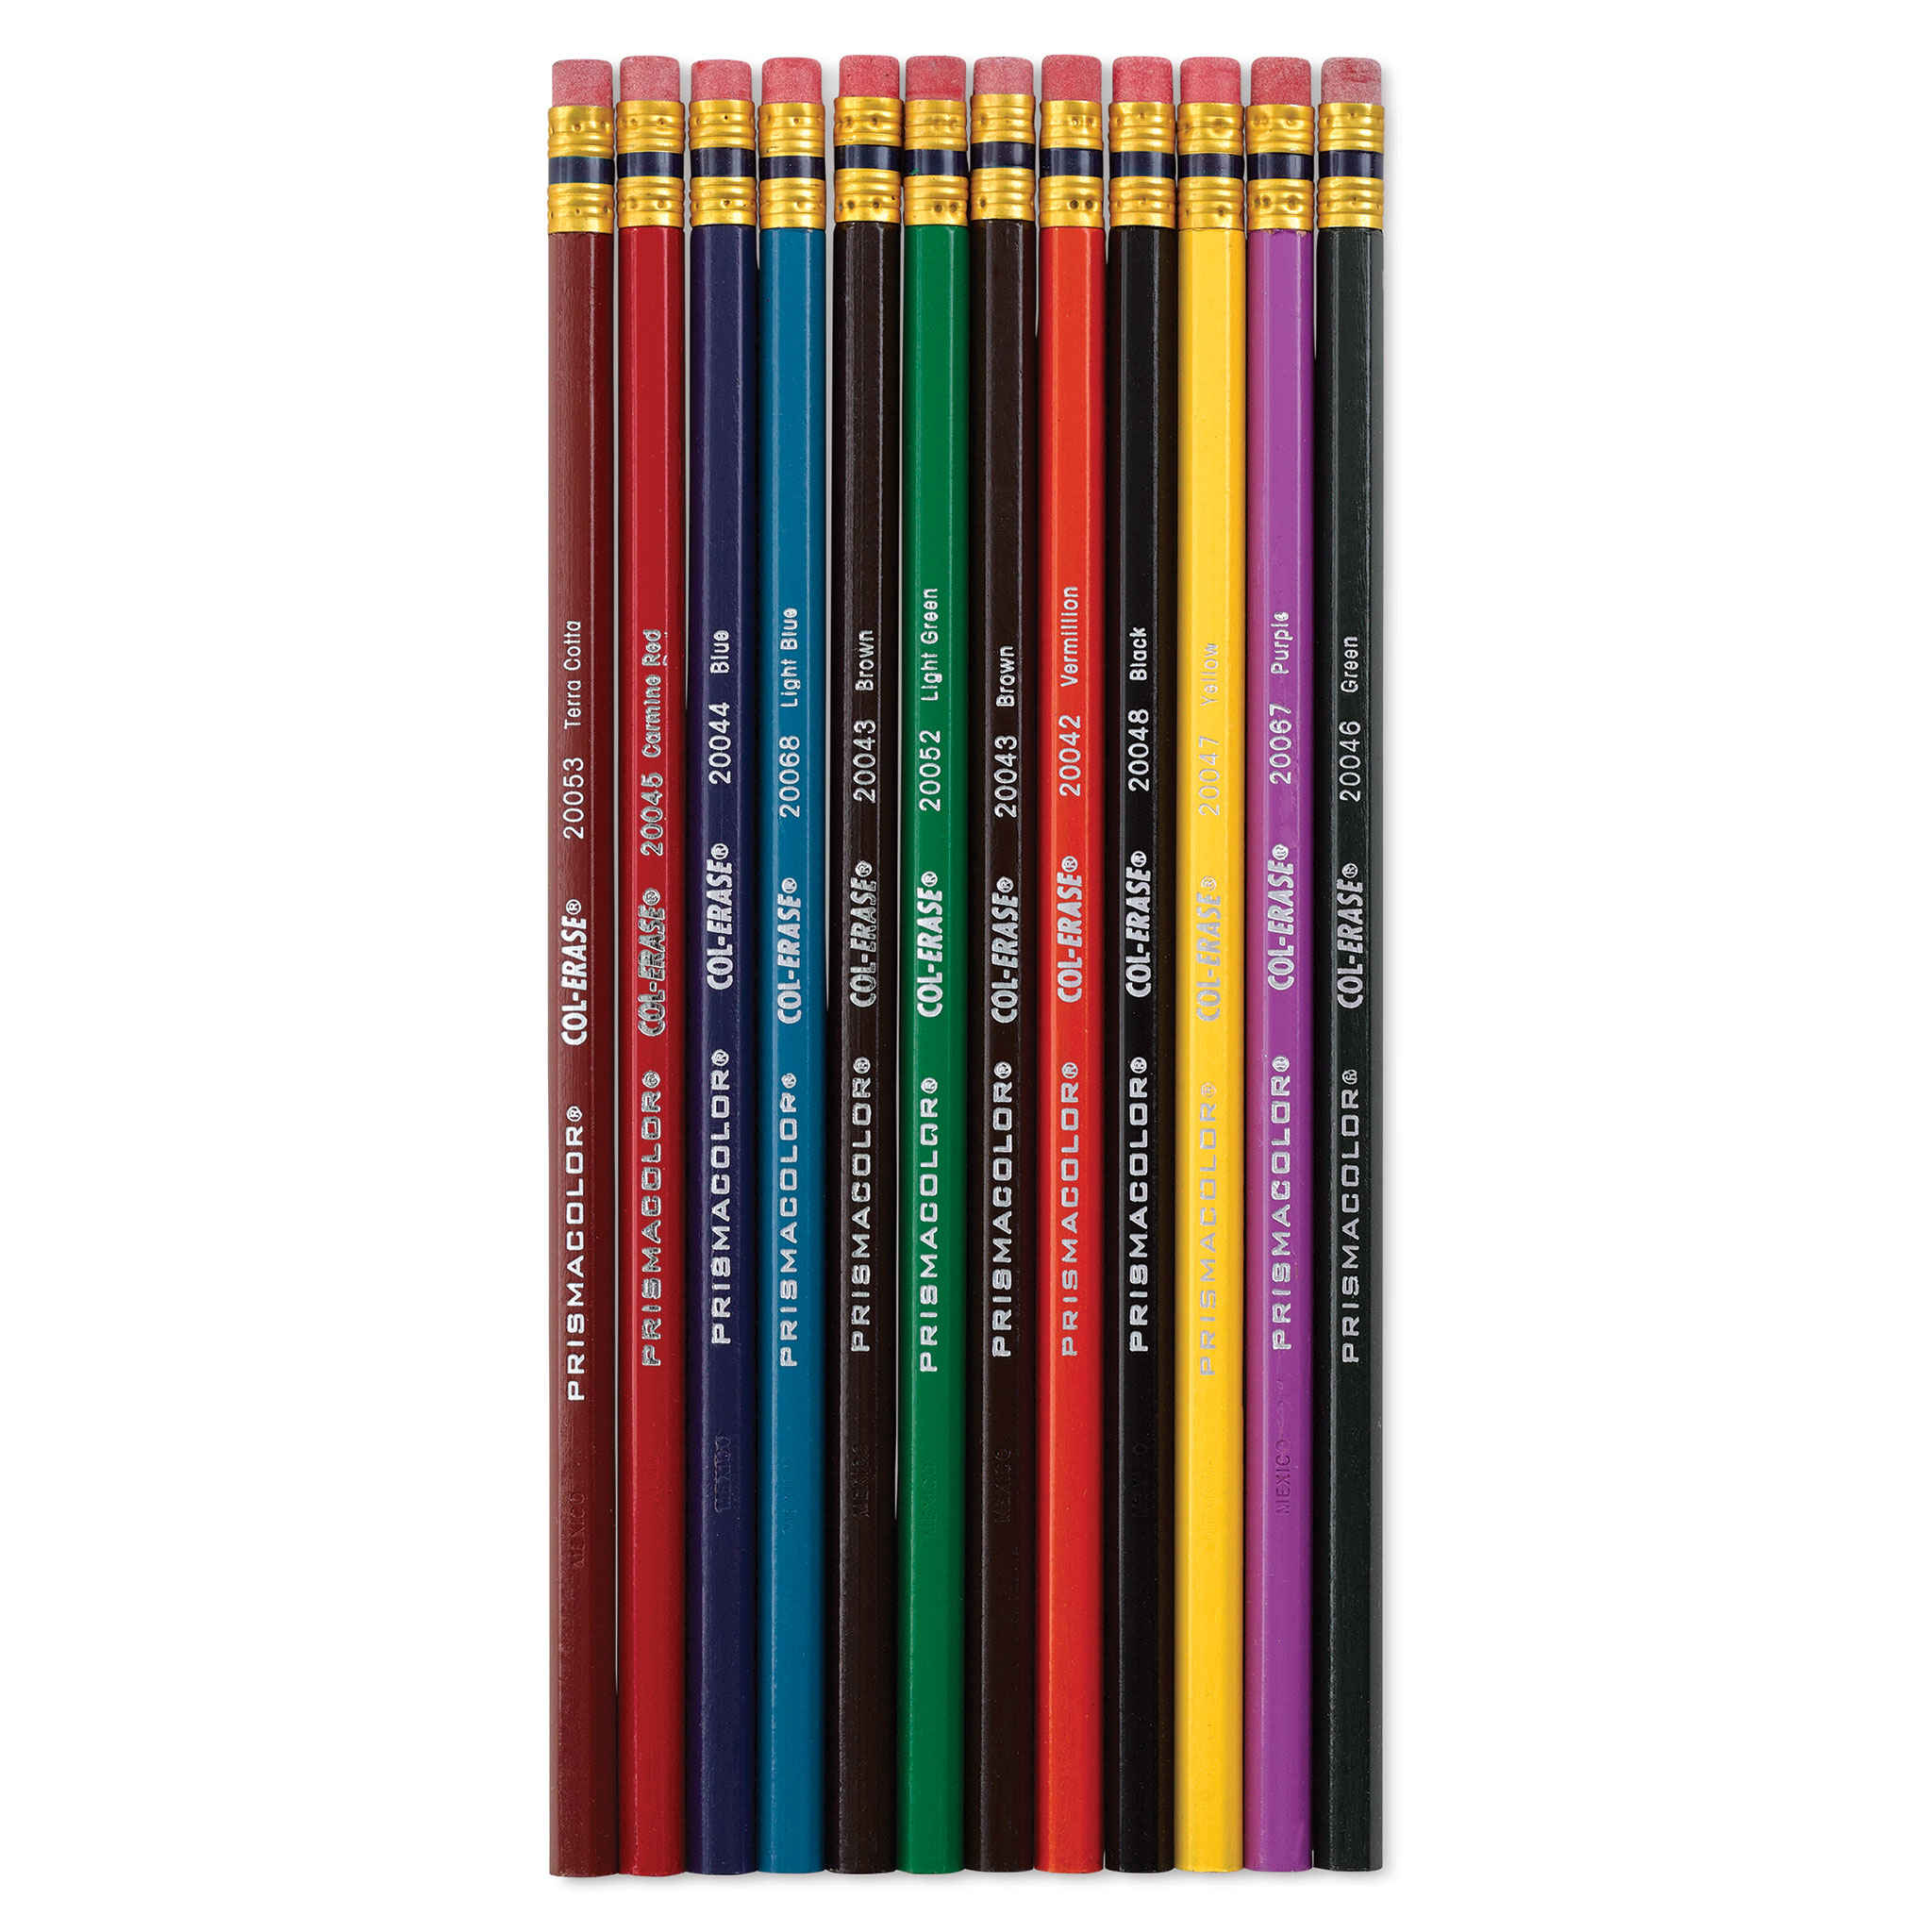 The Era of Individual Col-Erase Pencils Comes to a Close — The Wee